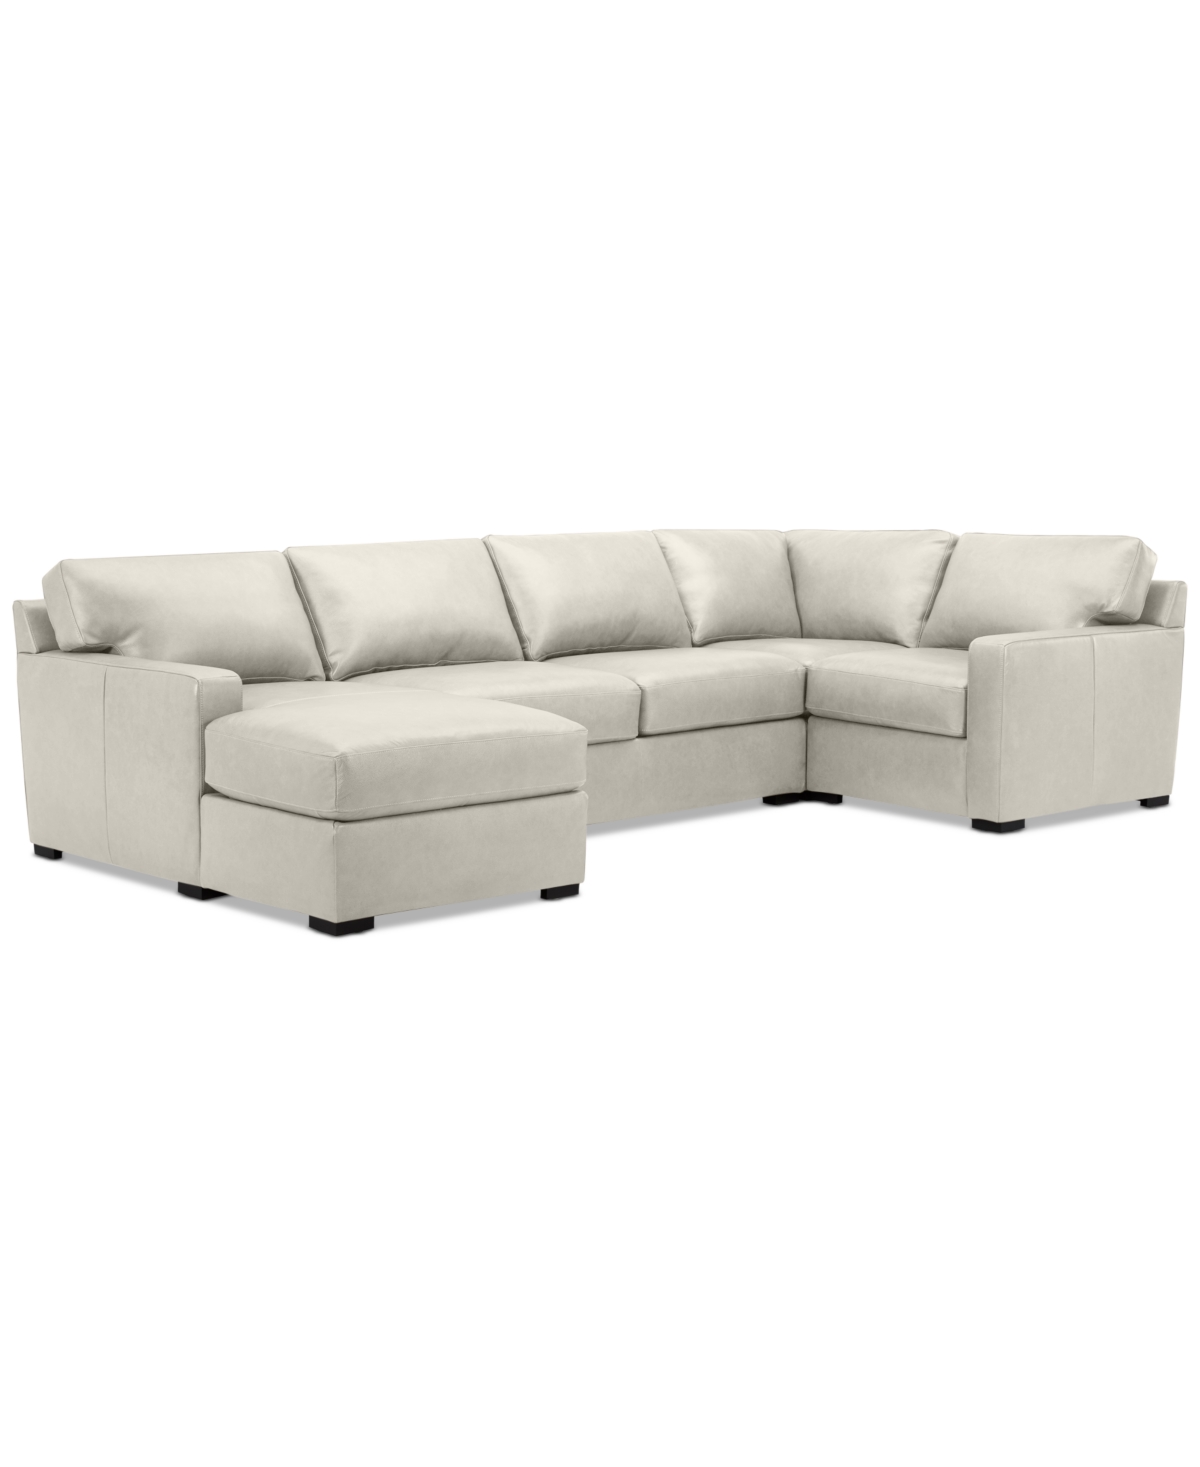 Macy's Radley 136" 4-pc. Leather Square Corner Modular Chaise Sectional, Created For  In Coconut Milk